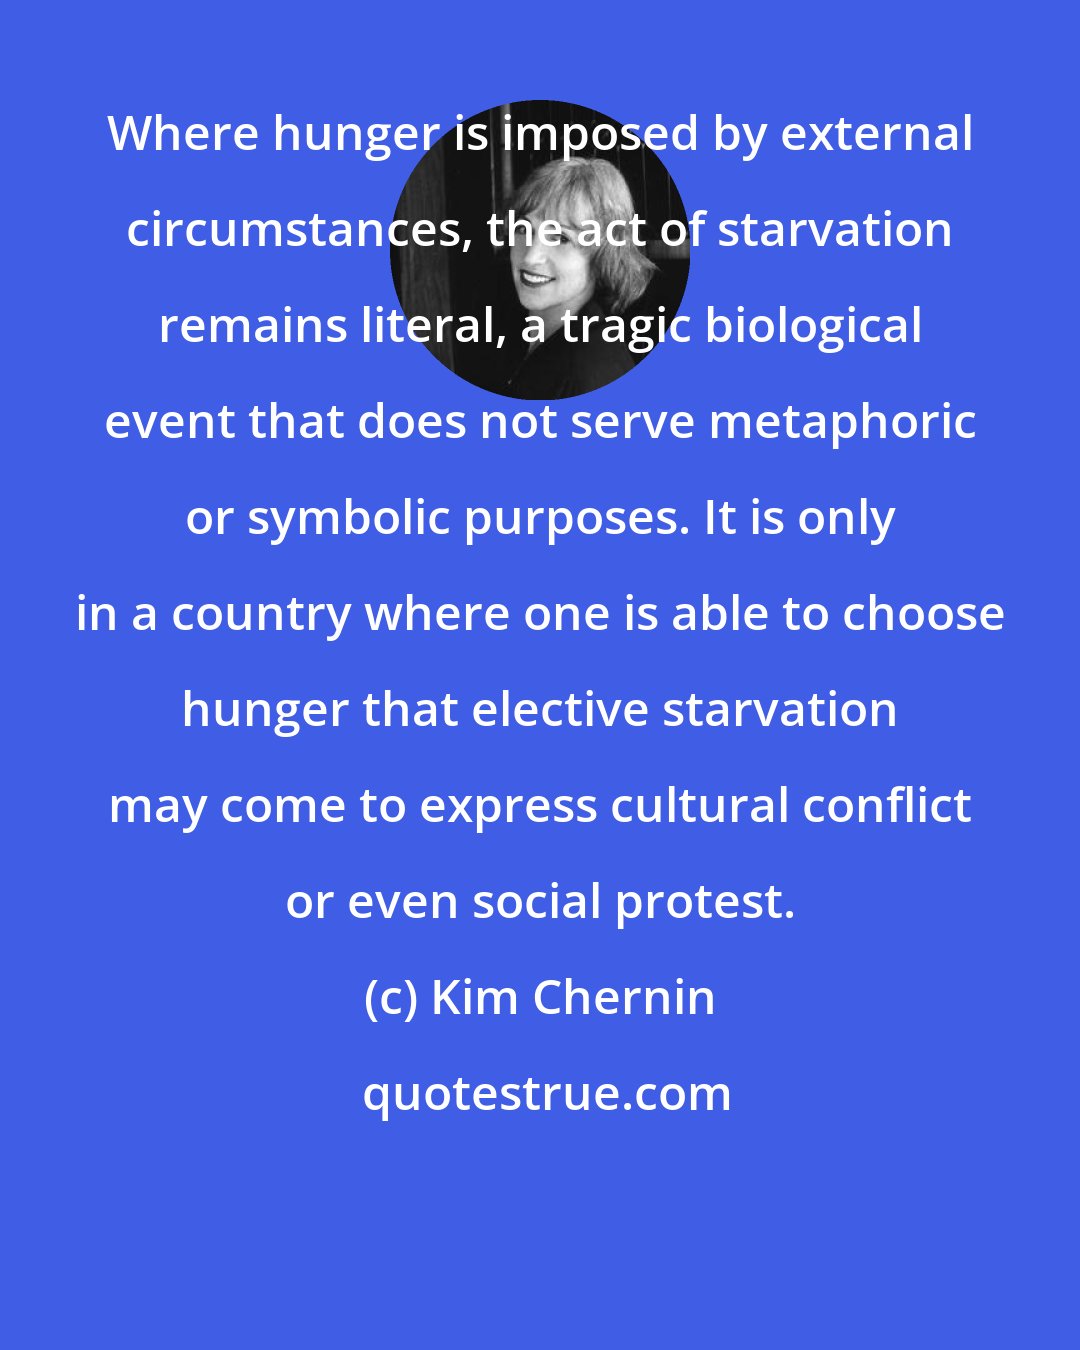 Kim Chernin: Where hunger is imposed by external circumstances, the act of starvation remains literal, a tragic biological event that does not serve metaphoric or symbolic purposes. It is only in a country where one is able to choose hunger that elective starvation may come to express cultural conflict or even social protest.